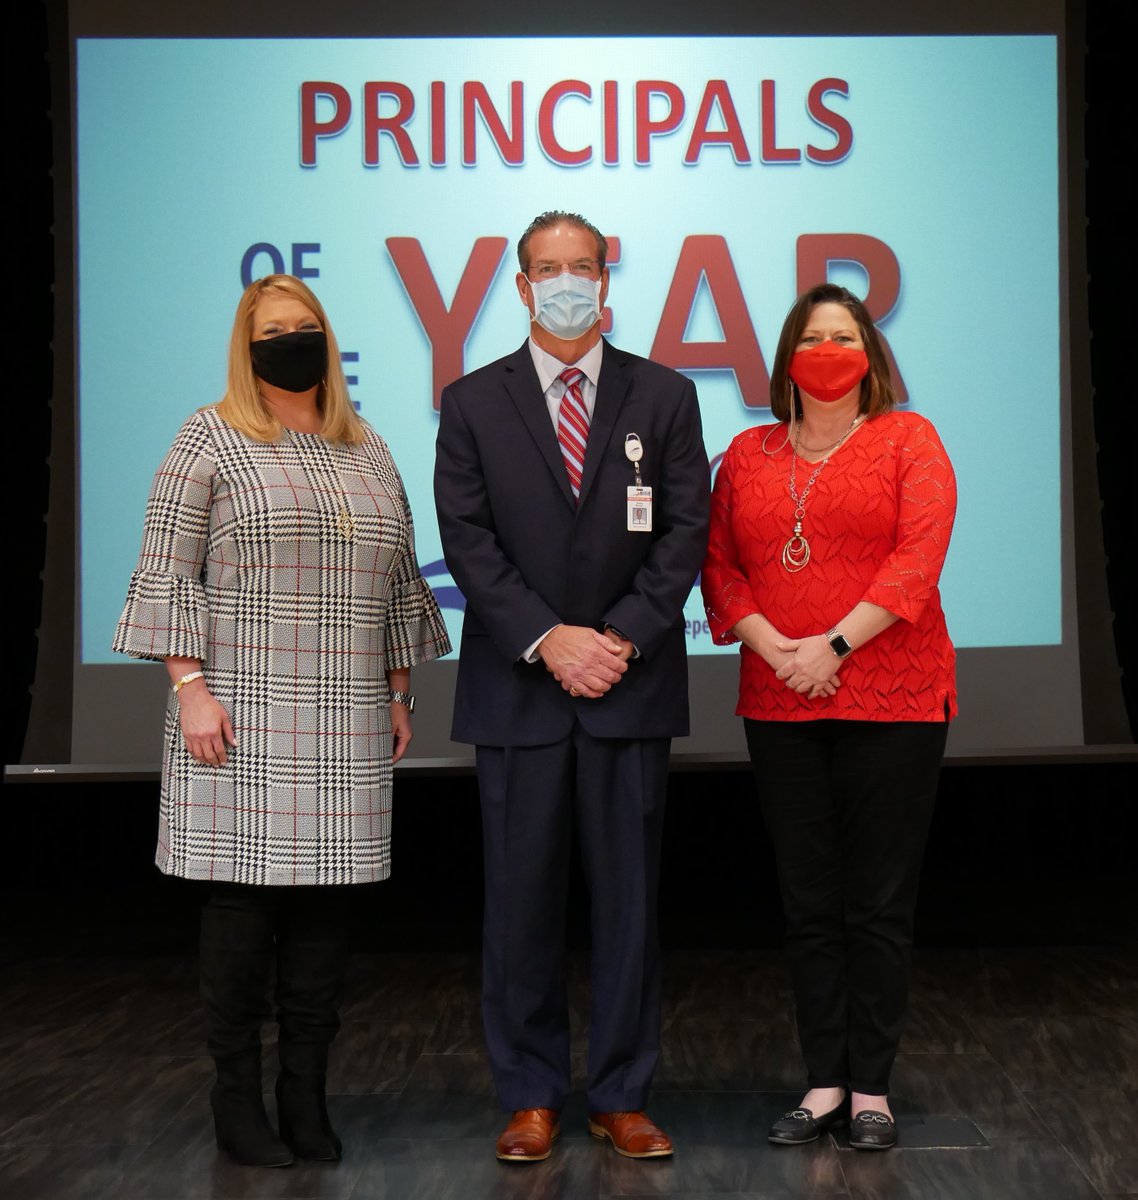 We are excited to announce our BISD Principals of the Year... Congratulations to Laura Morris (AP Beutel) BISD Elementary Principal of the Year and Bridgette Percle (Lanier) BISD Secondary Principal of the Year! bit.ly/3knTyBO #bisdcoffeebeans #BISDpride